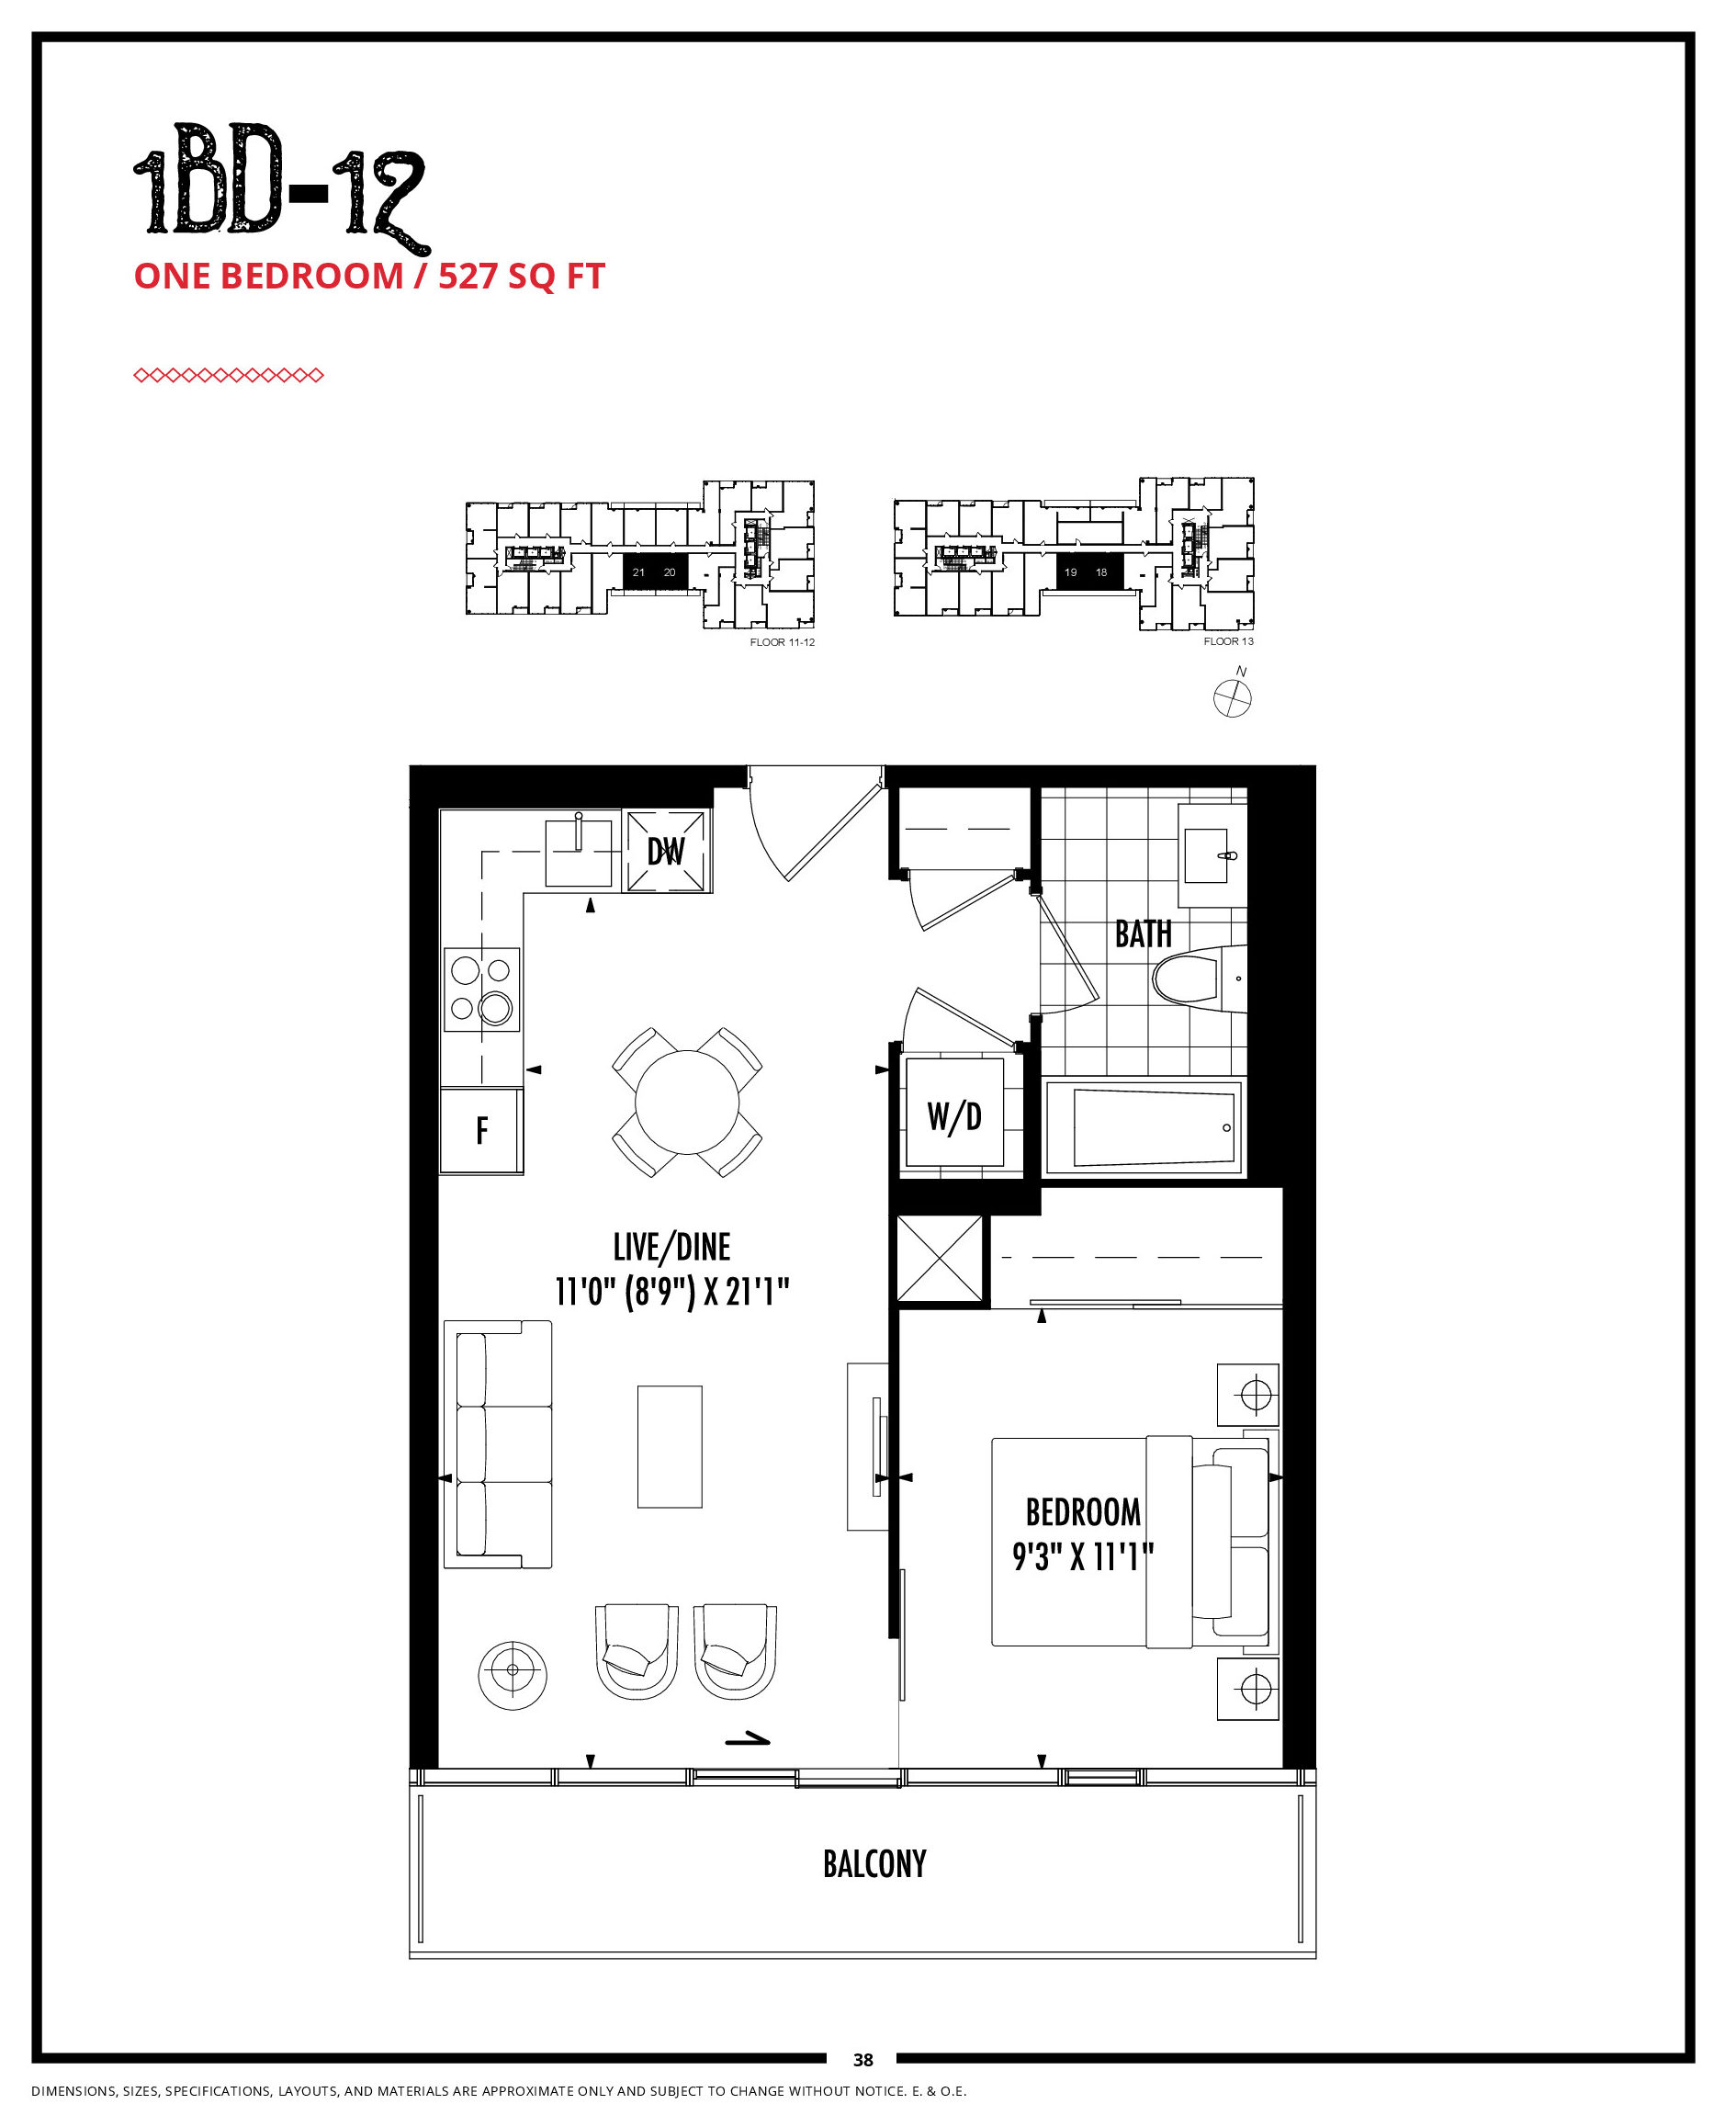 St. Lawrence Condos Floor Plans, Prices, Availability